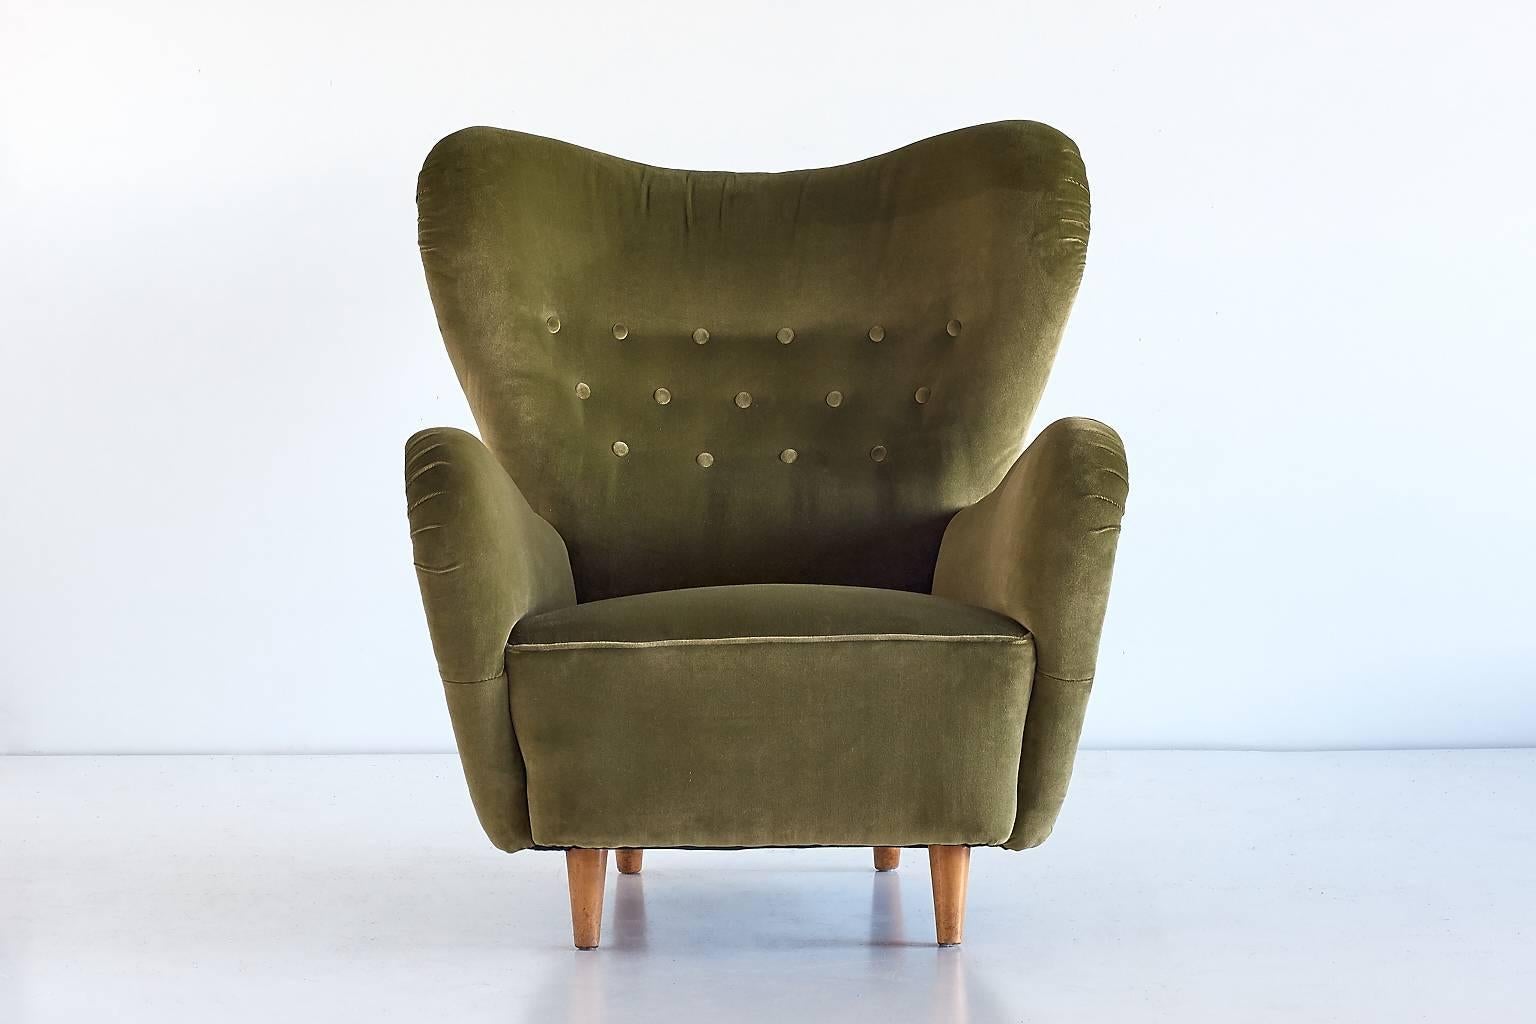 This rare high back armchair was designed by Otto Schultz and produced by Boet in Göteborg, Sweden, 1946. The elegant organic lines of the design create a striking Silhouette. Its generous proportions, the high back and the soft green velvet